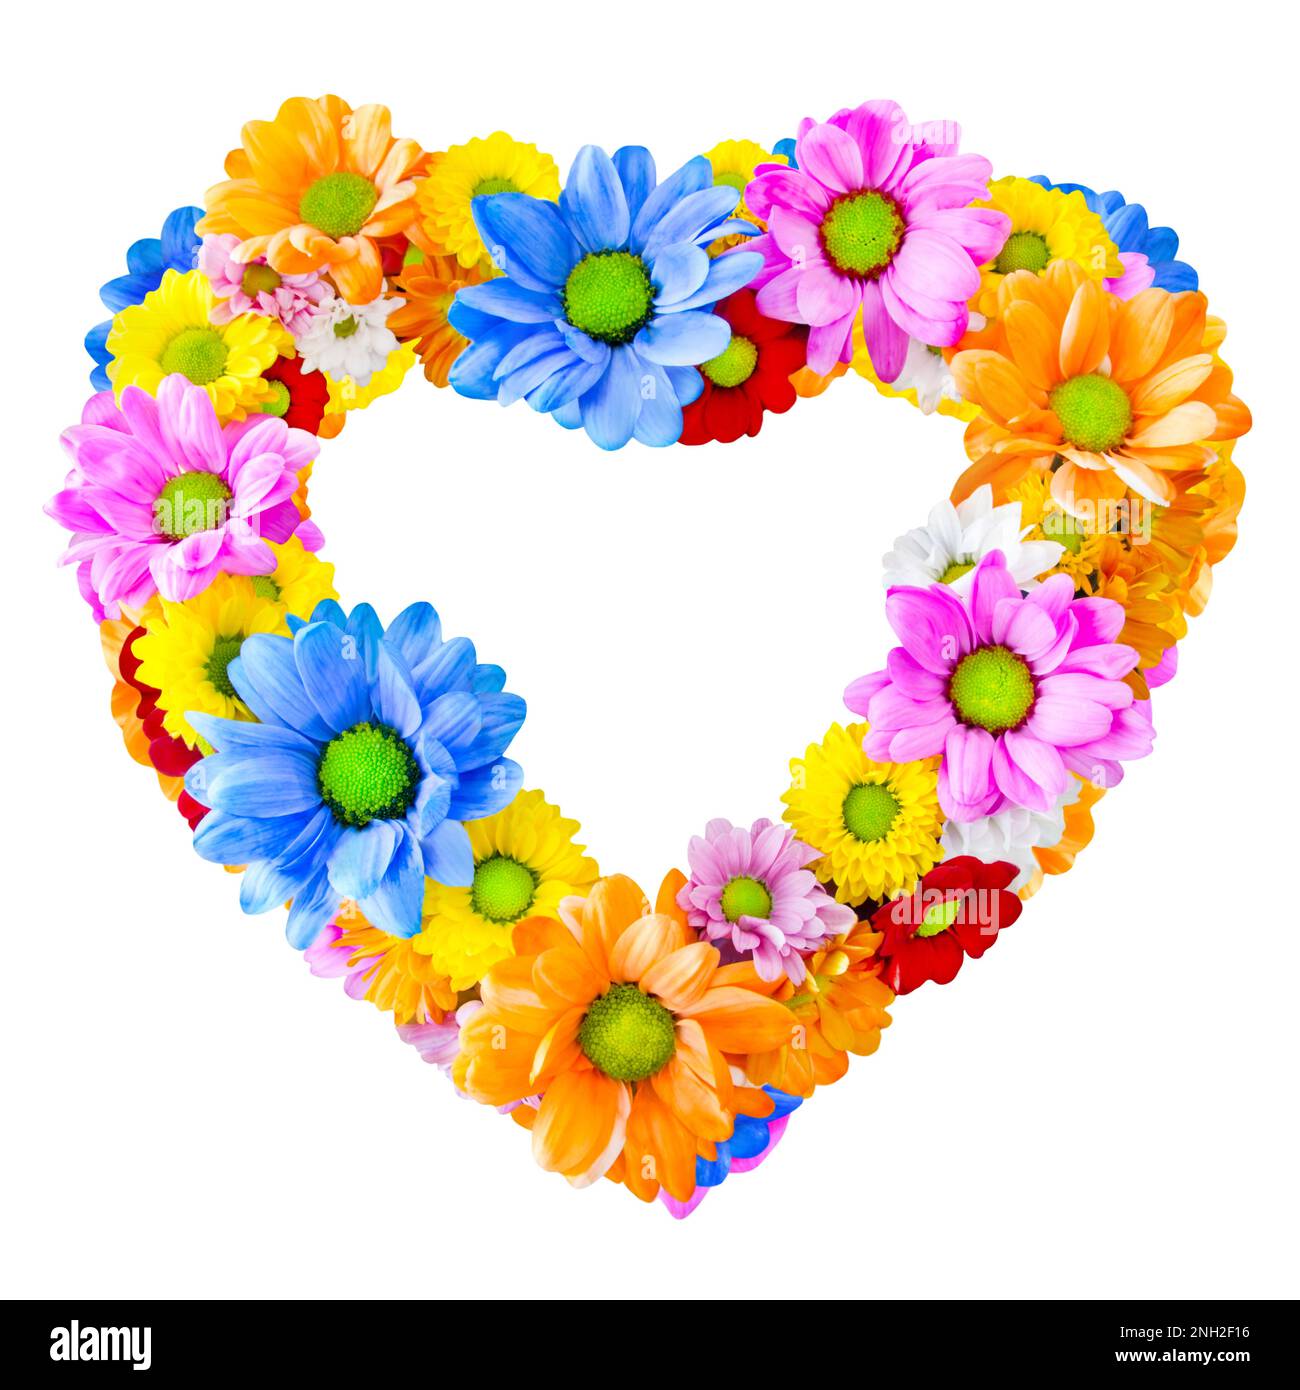 Colorful heart with flowers isolated on white  background Stock Photo